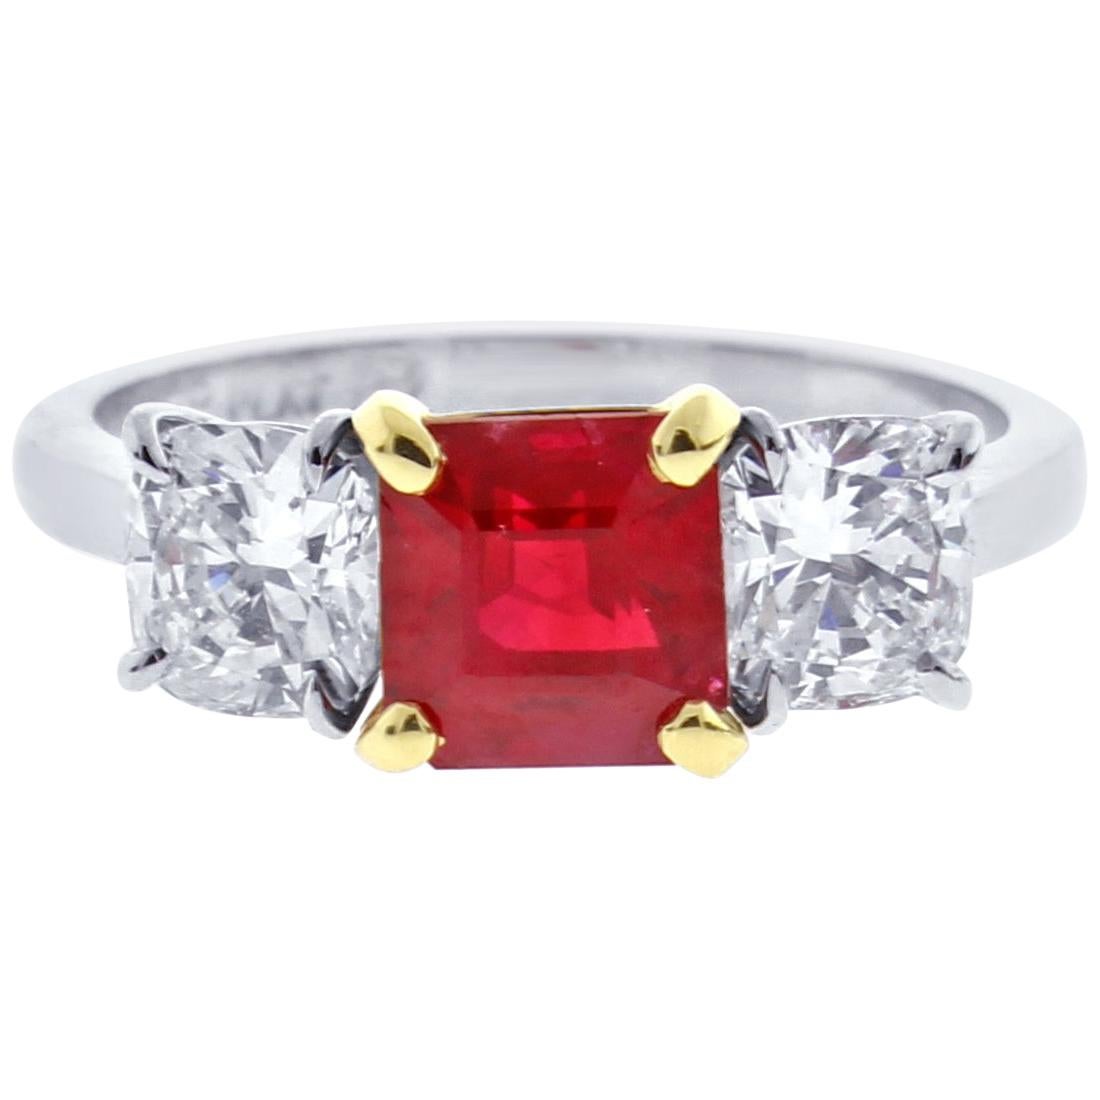 A.G.L. Burma Ruby and Diamond Thee-Stone Ring, by Pampillonia